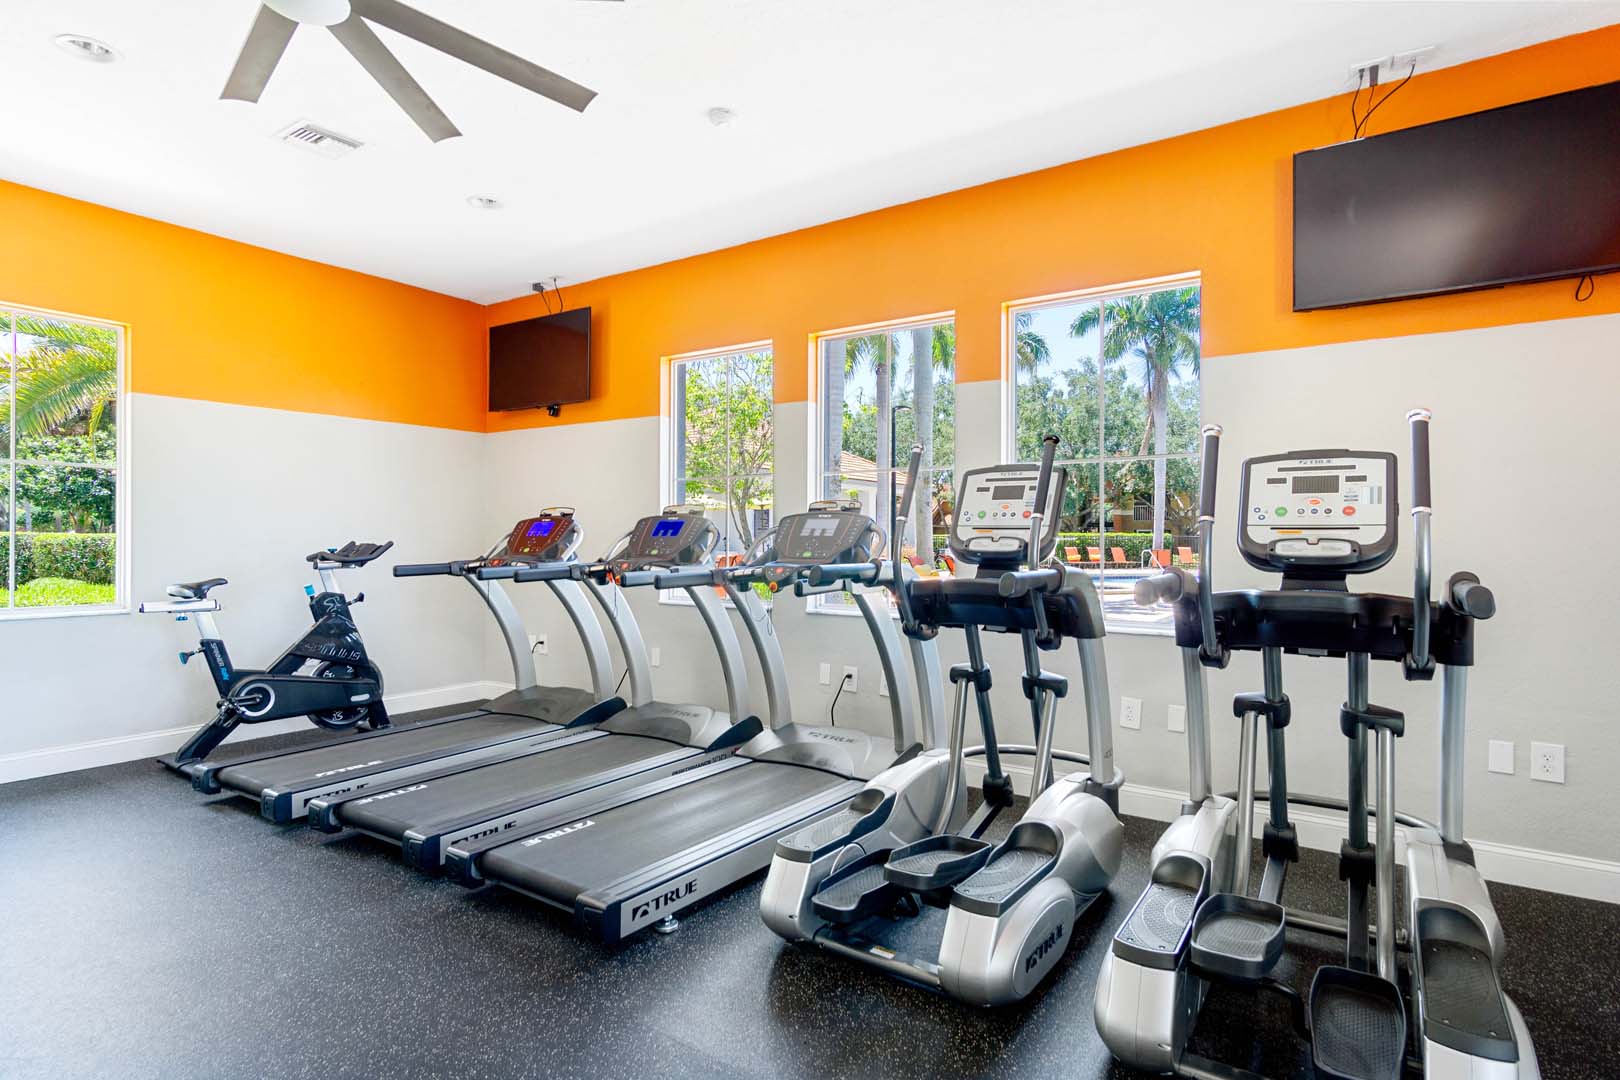 Fitness center with treadmills, ellipticals and excercise bike with large ceiling fan and two tvs on the wall.